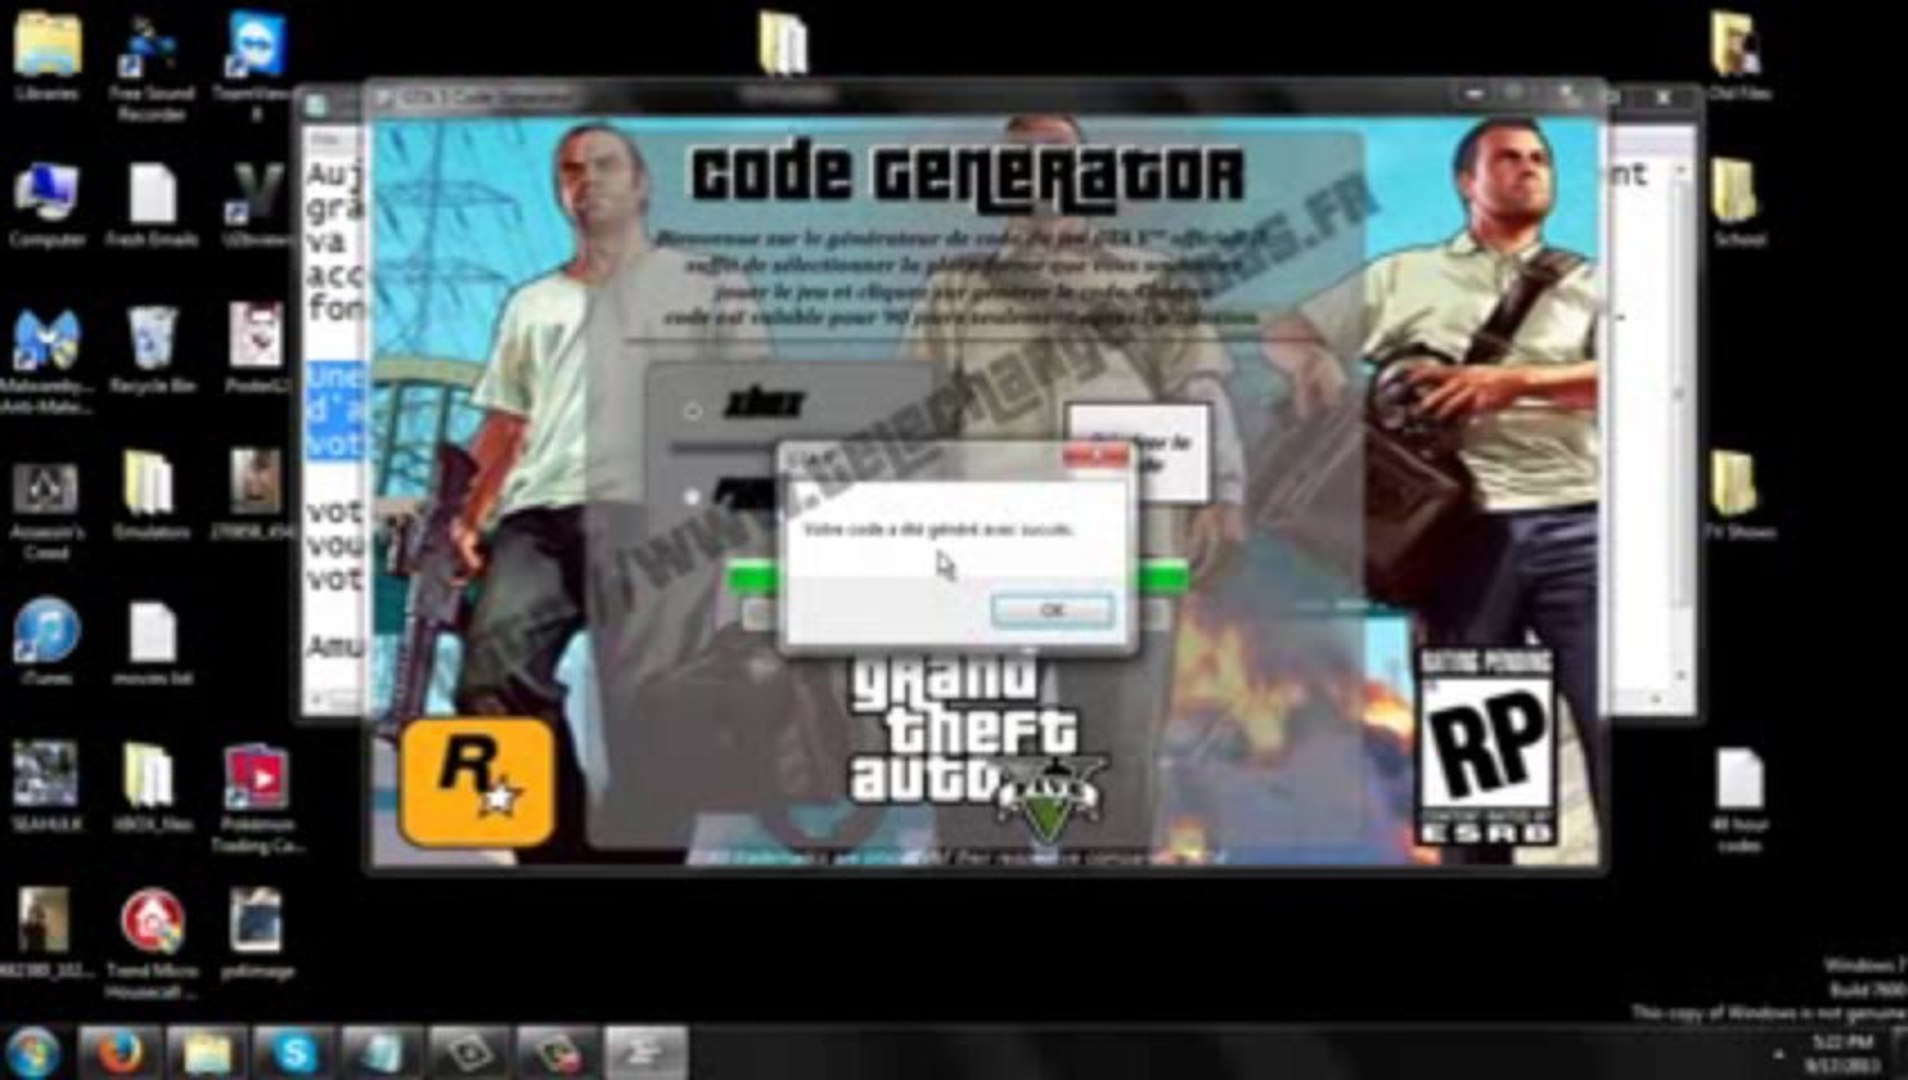 Telecharger GTA 5 Gratuitemente, Xbox 360 , PS3 , Xbox One , Playstation 4  - video Dailymotion